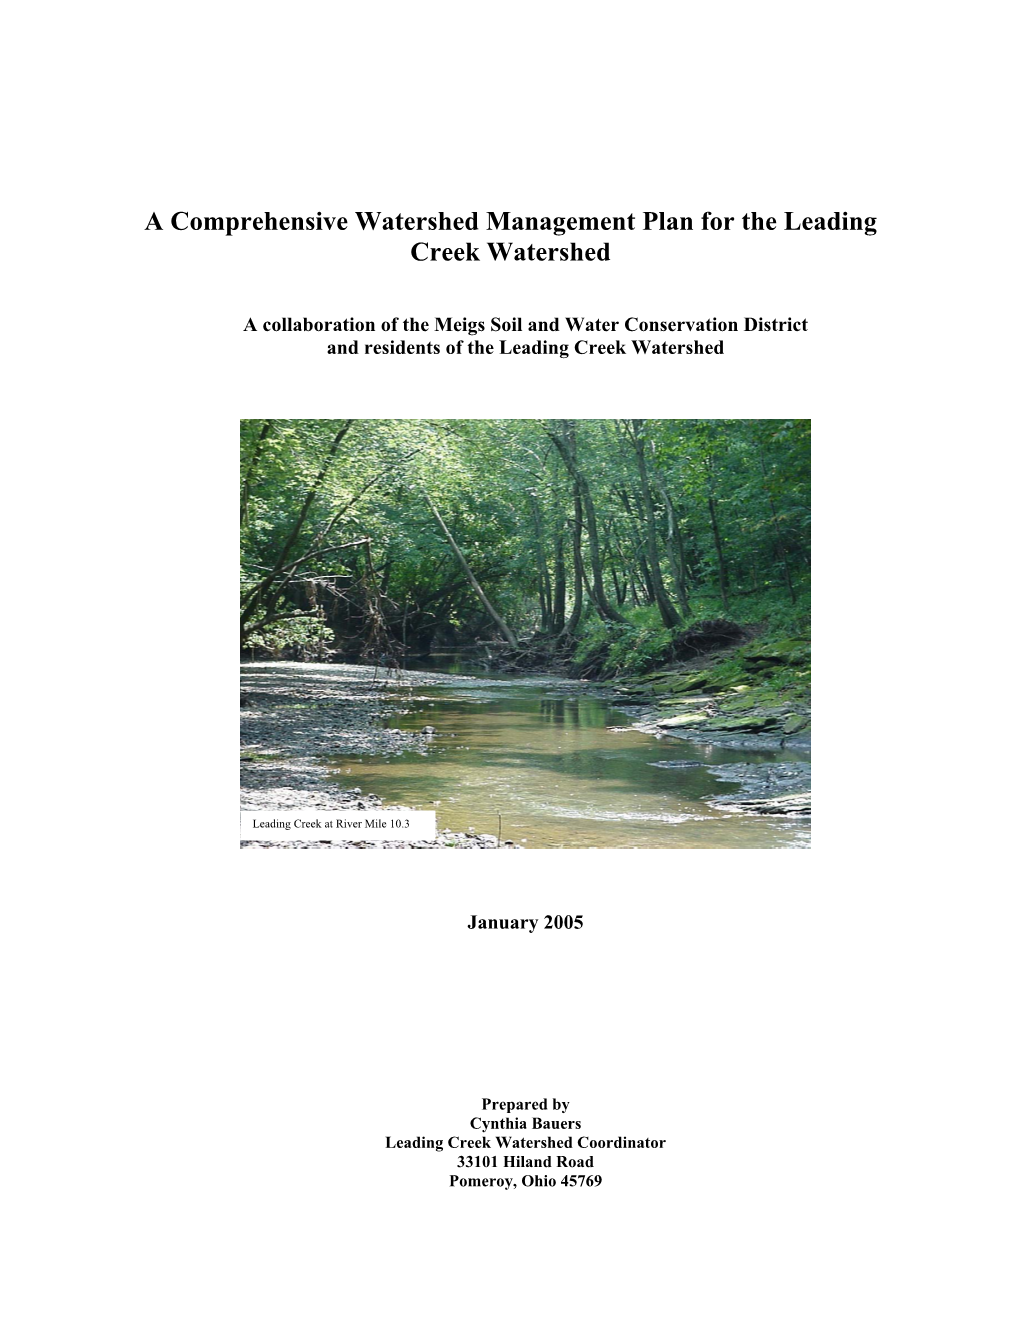 A Comprehensive Watershed Management Plan for the Leading Creek Watershed